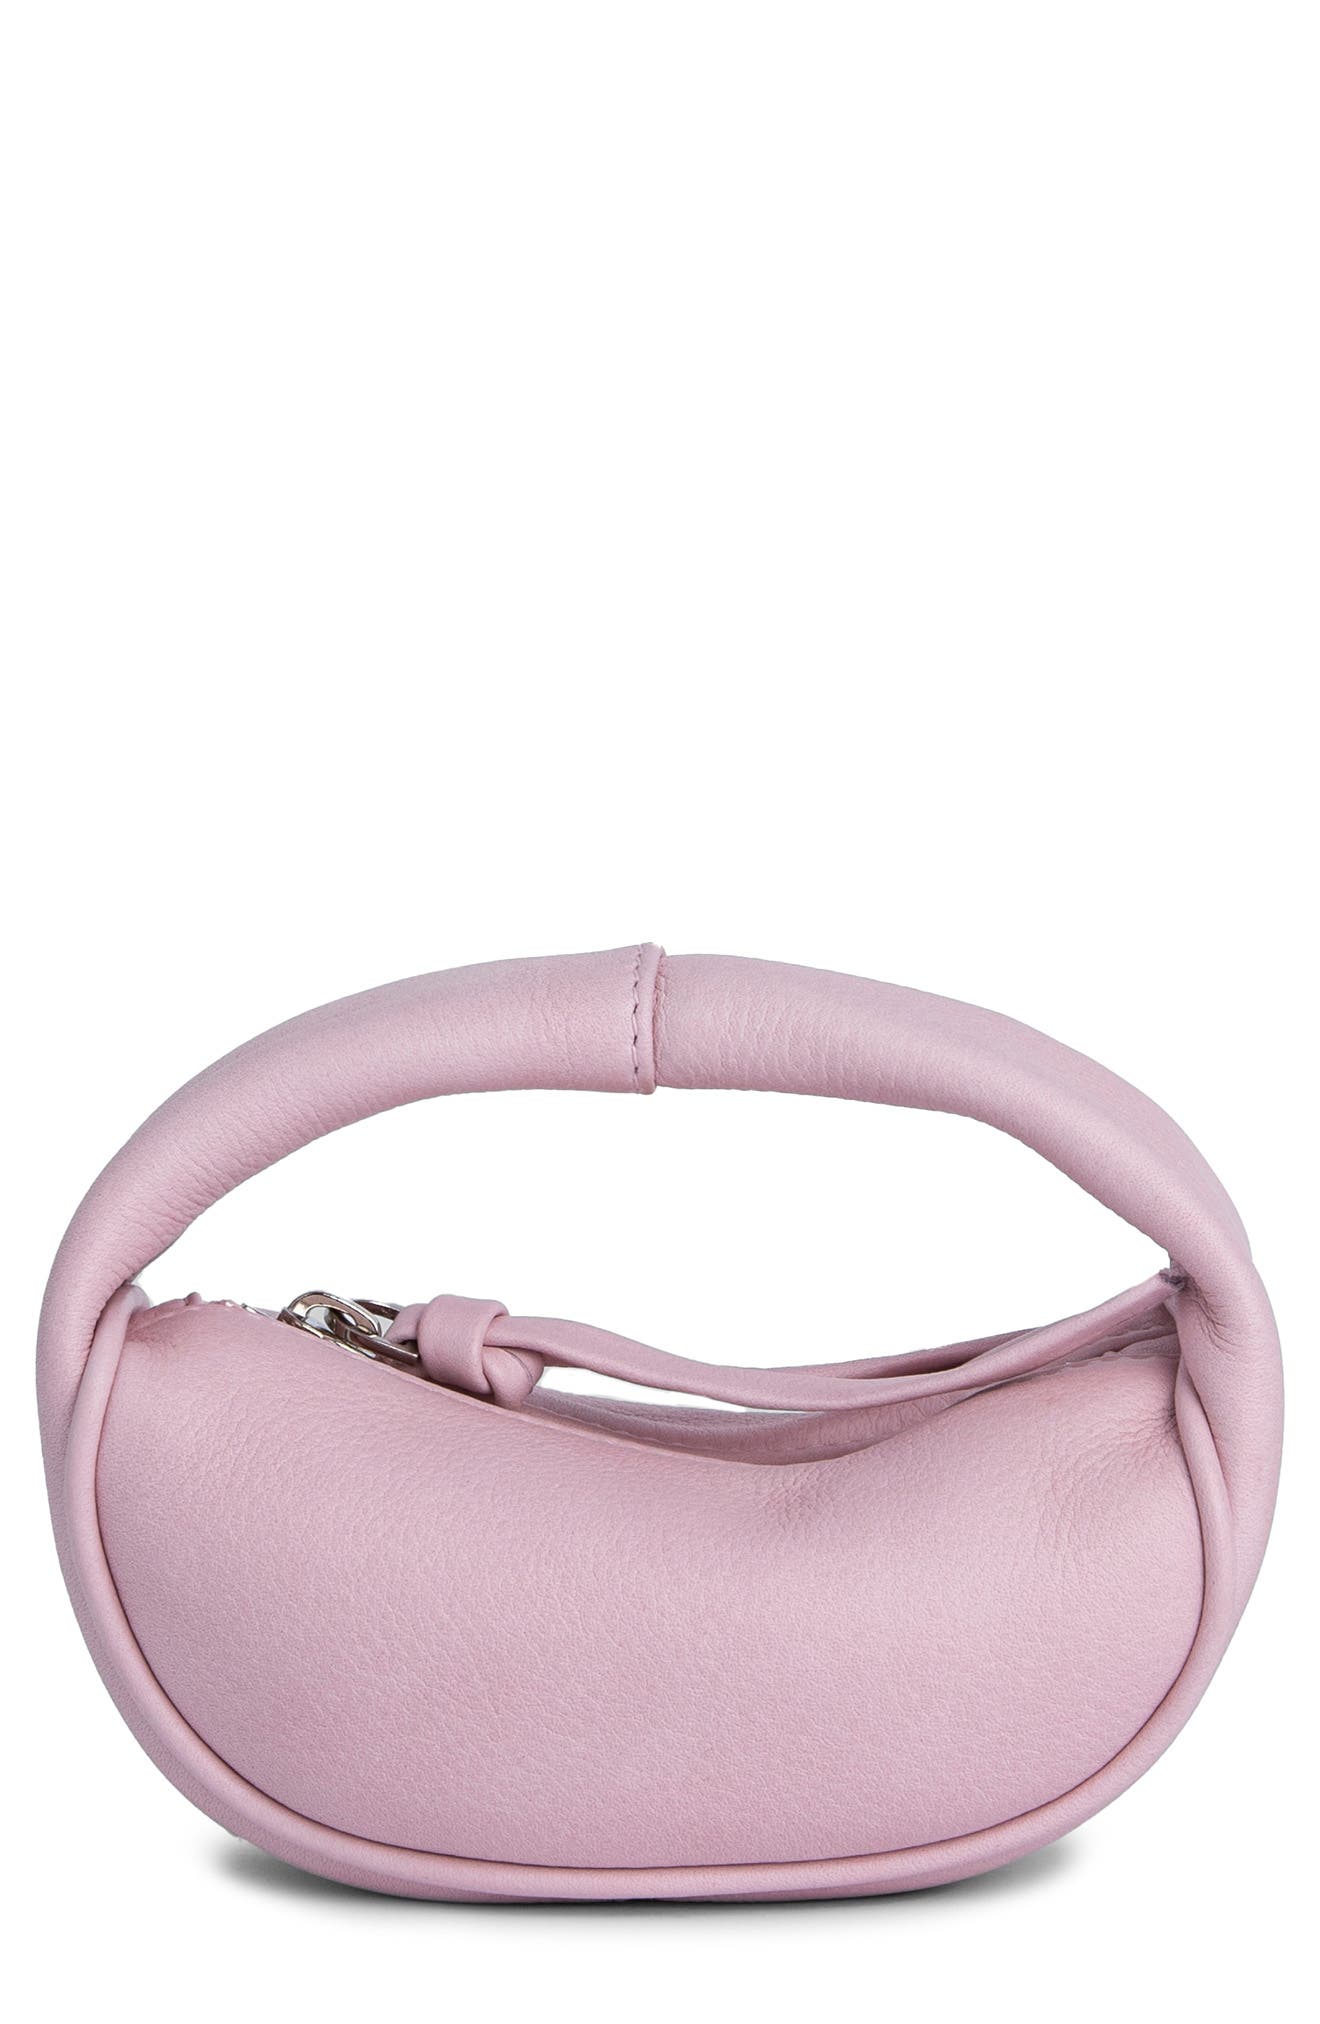 By Far Micro Cush Leather Top Handle Bag in Peony at Nordstrom